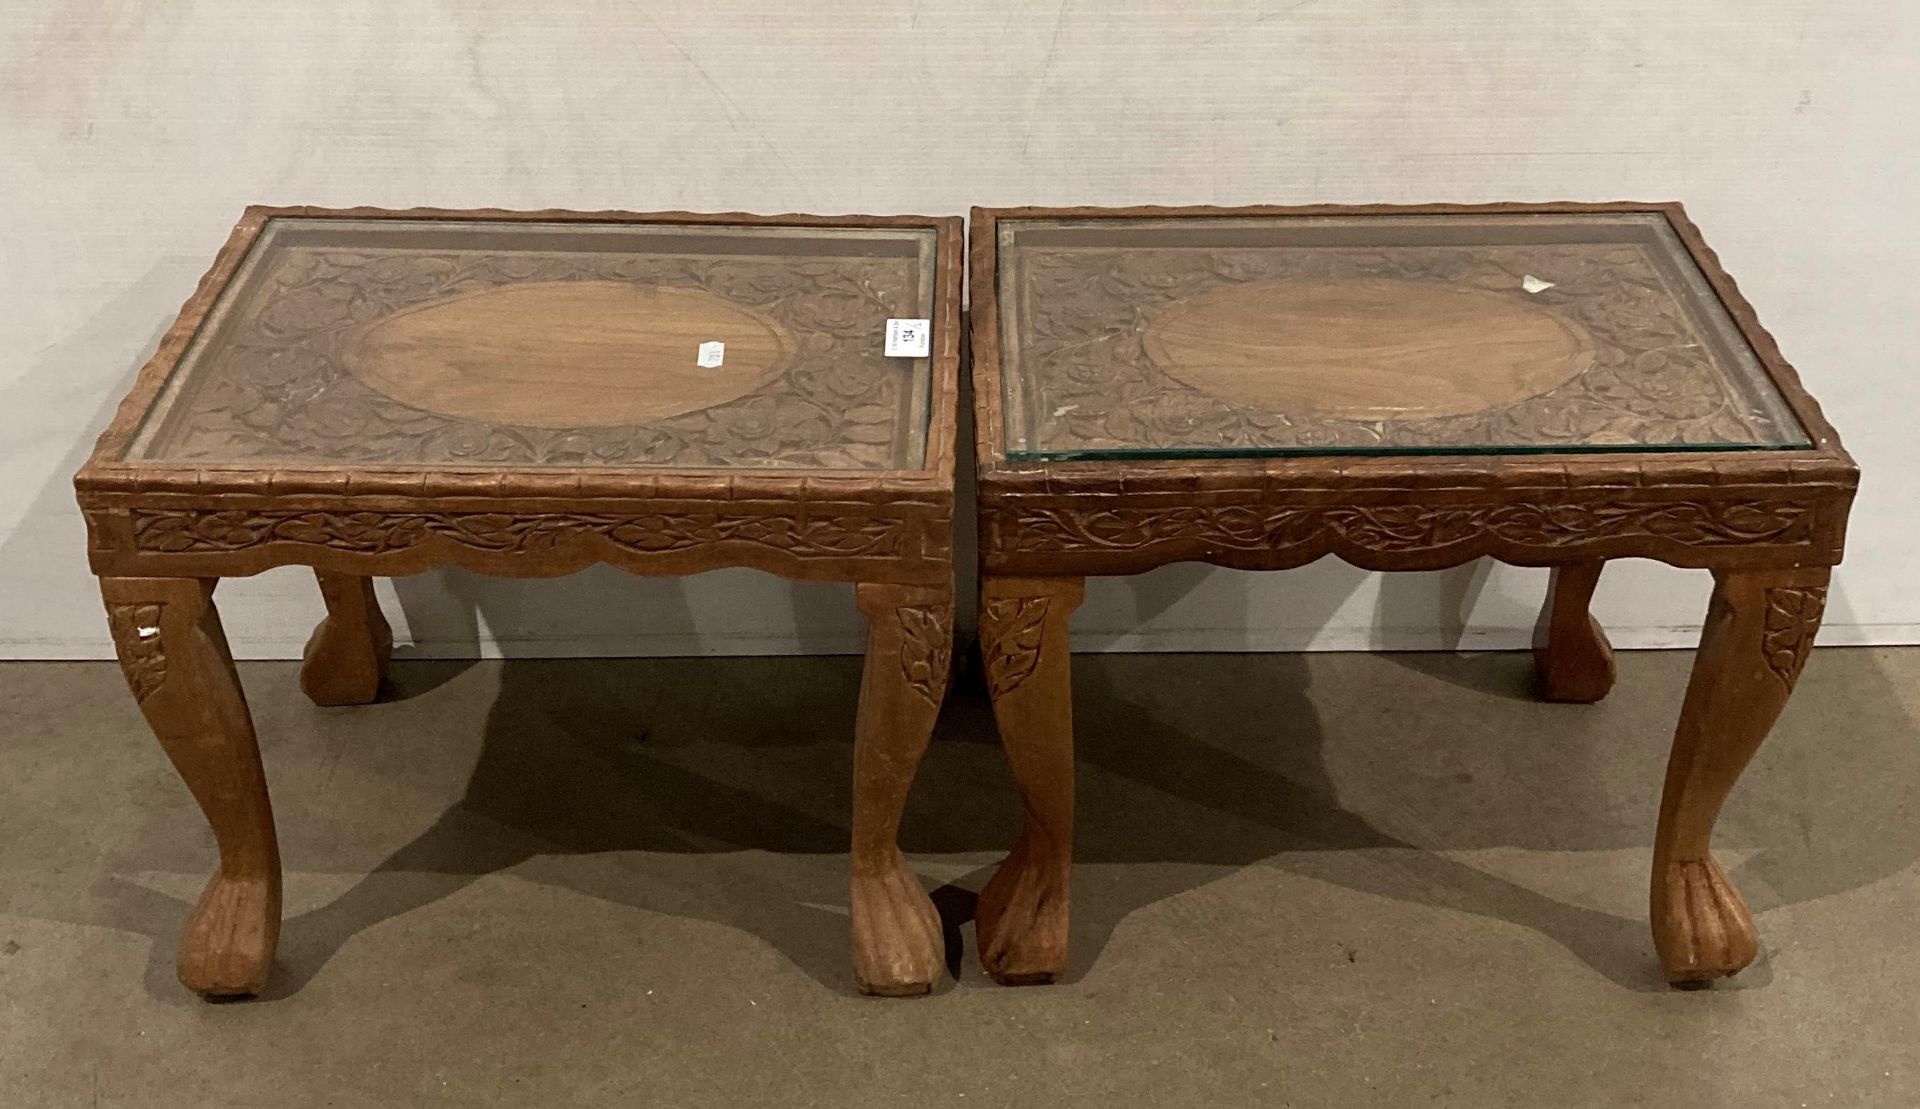 A pair of Asian hand-carved wooden tables with glass tops and with a floral design to each table,